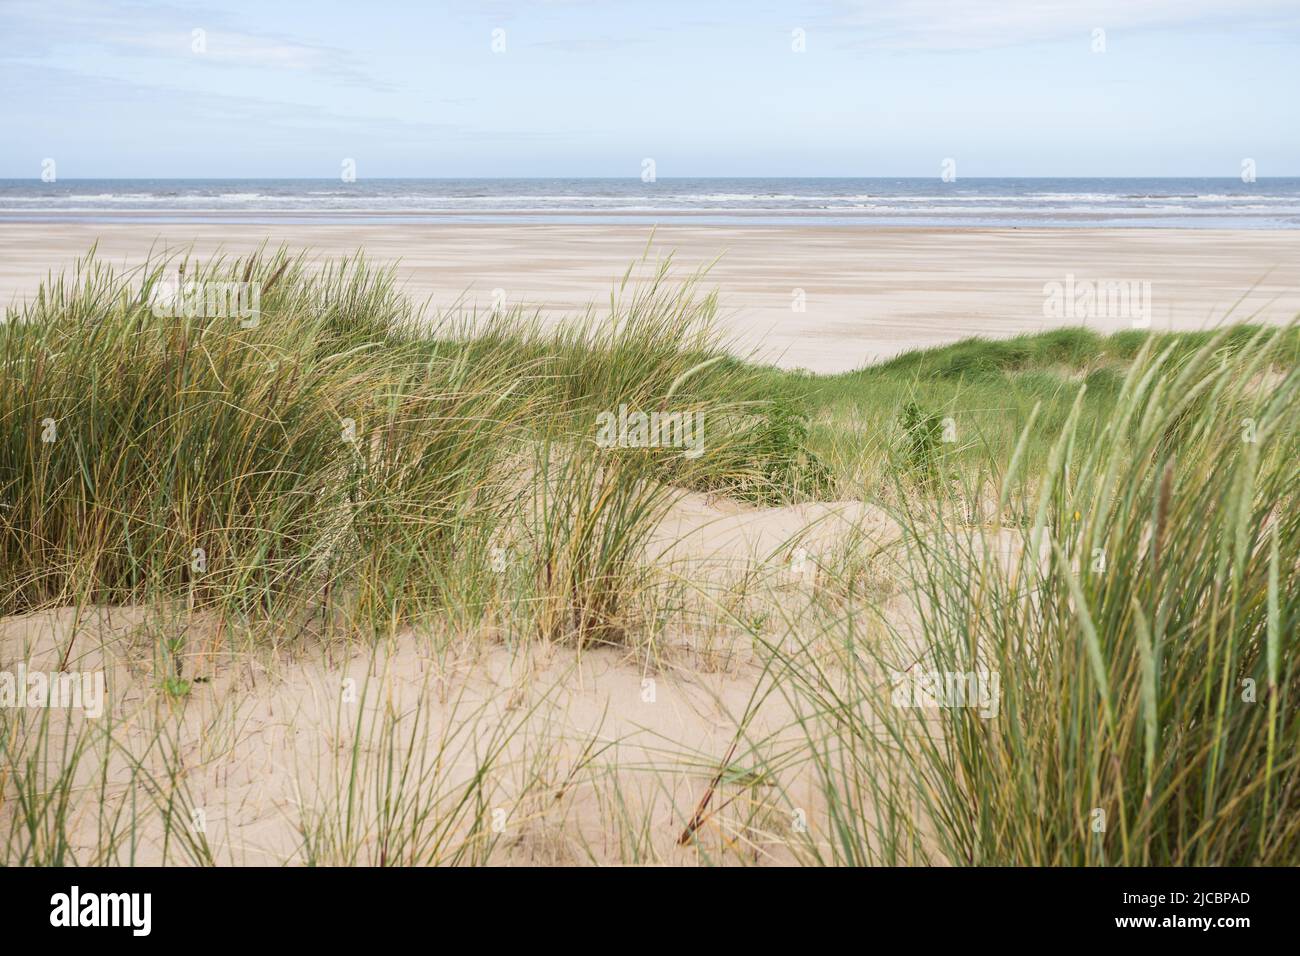 Overlooking the long marram grass on the sand dunes which line Ainsdale beach on the Sefton coast near Southport. Stock Photo